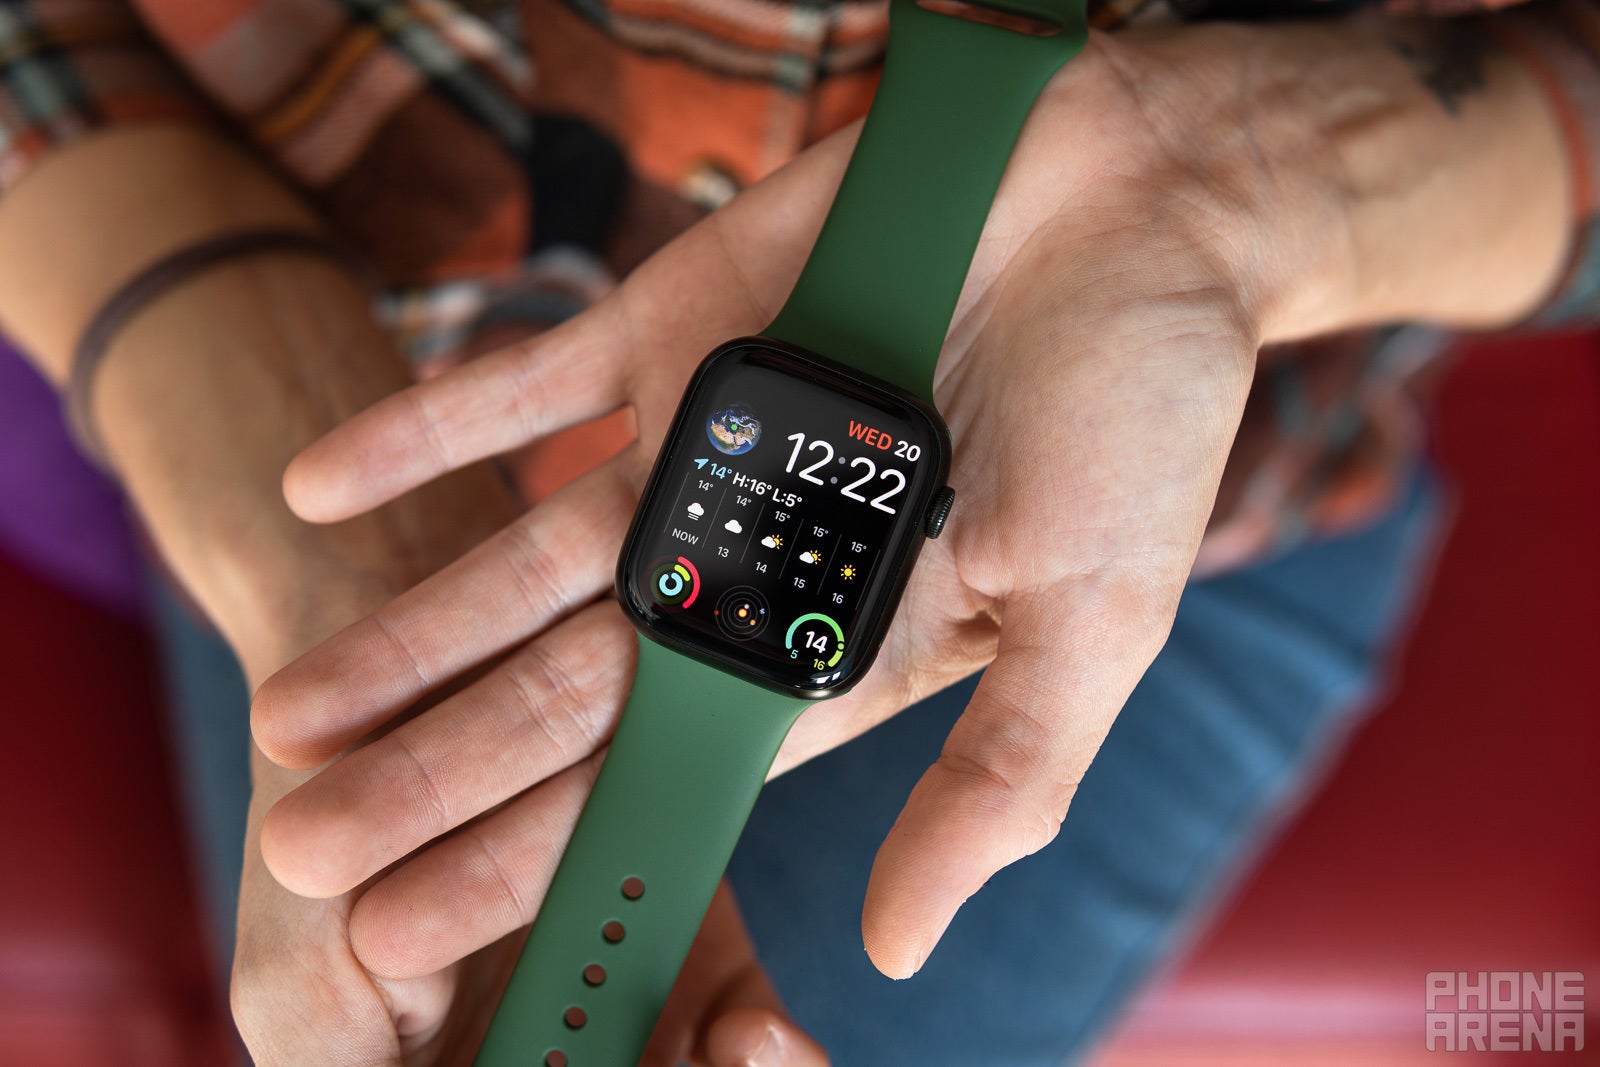 Time for Apple to stop being a control freak? Why the Apple Watch fails as a fashion accessory